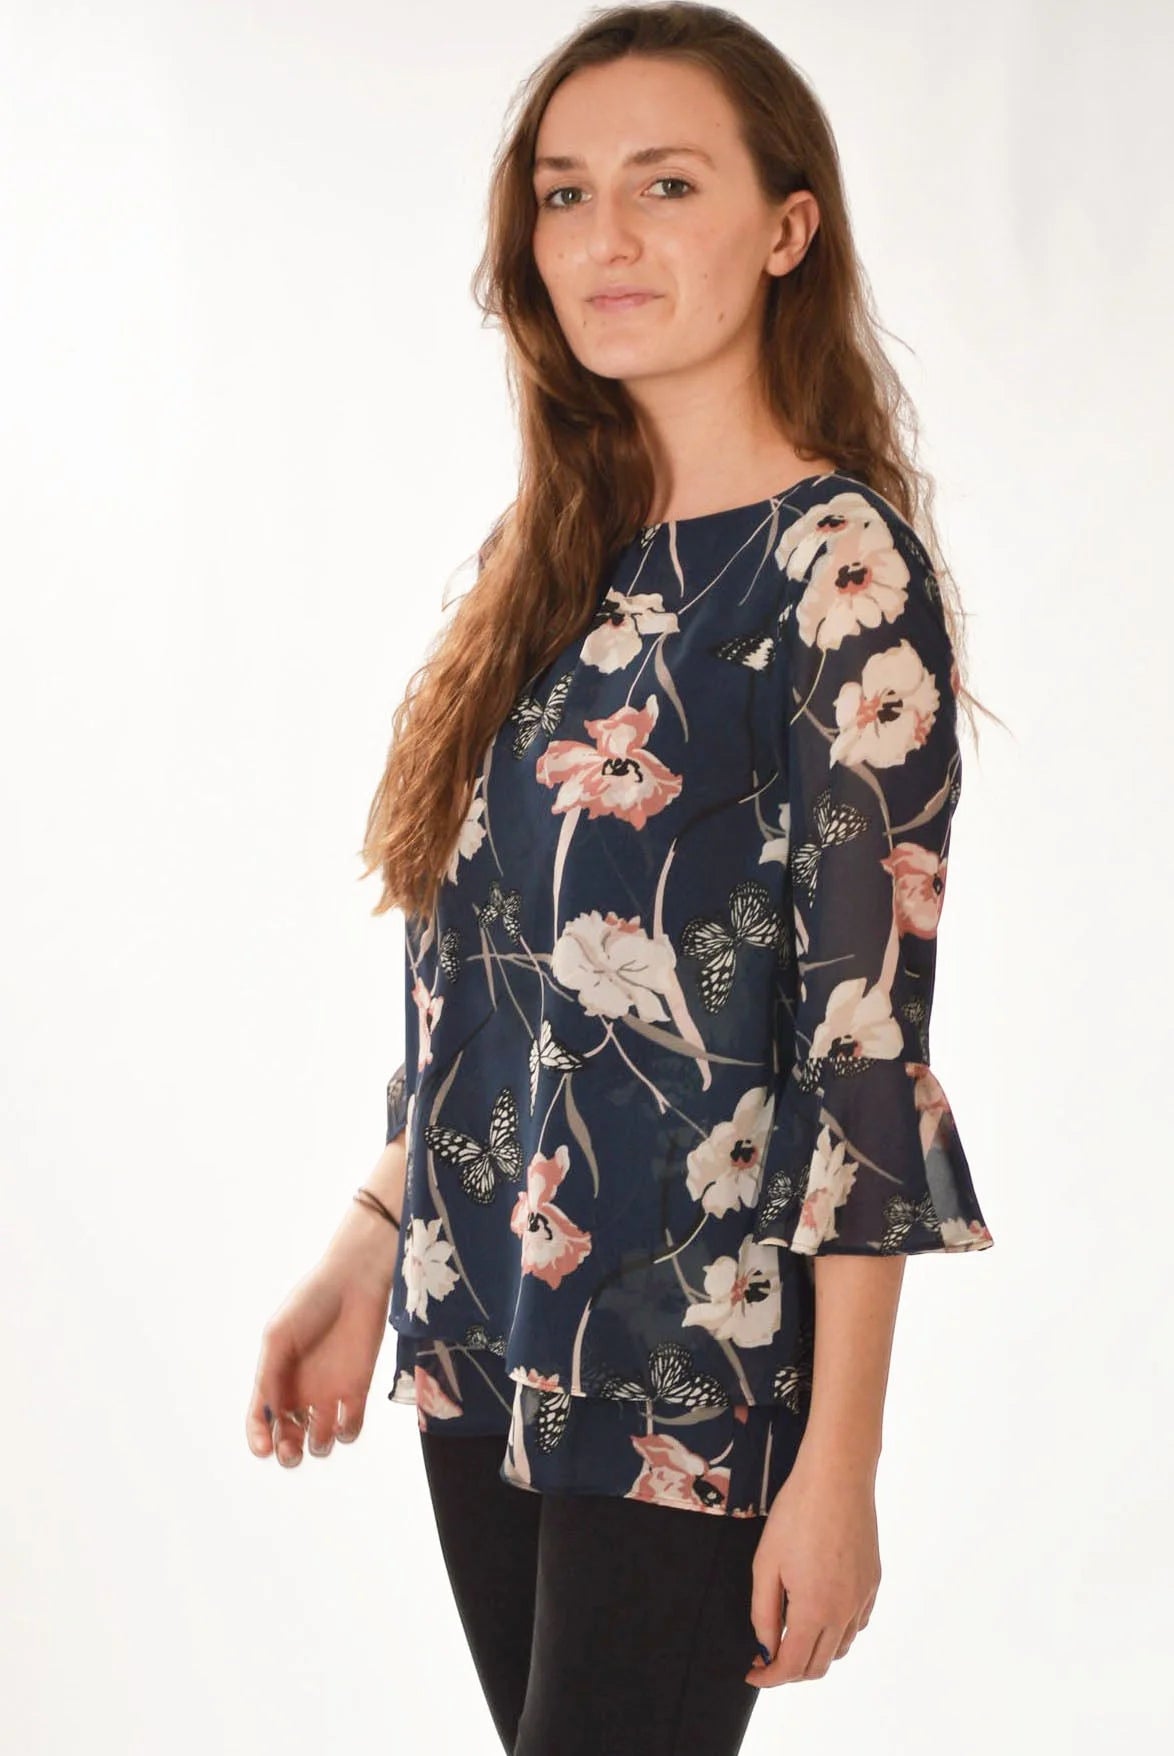 M&S Floral Flare Sleeve Blouse